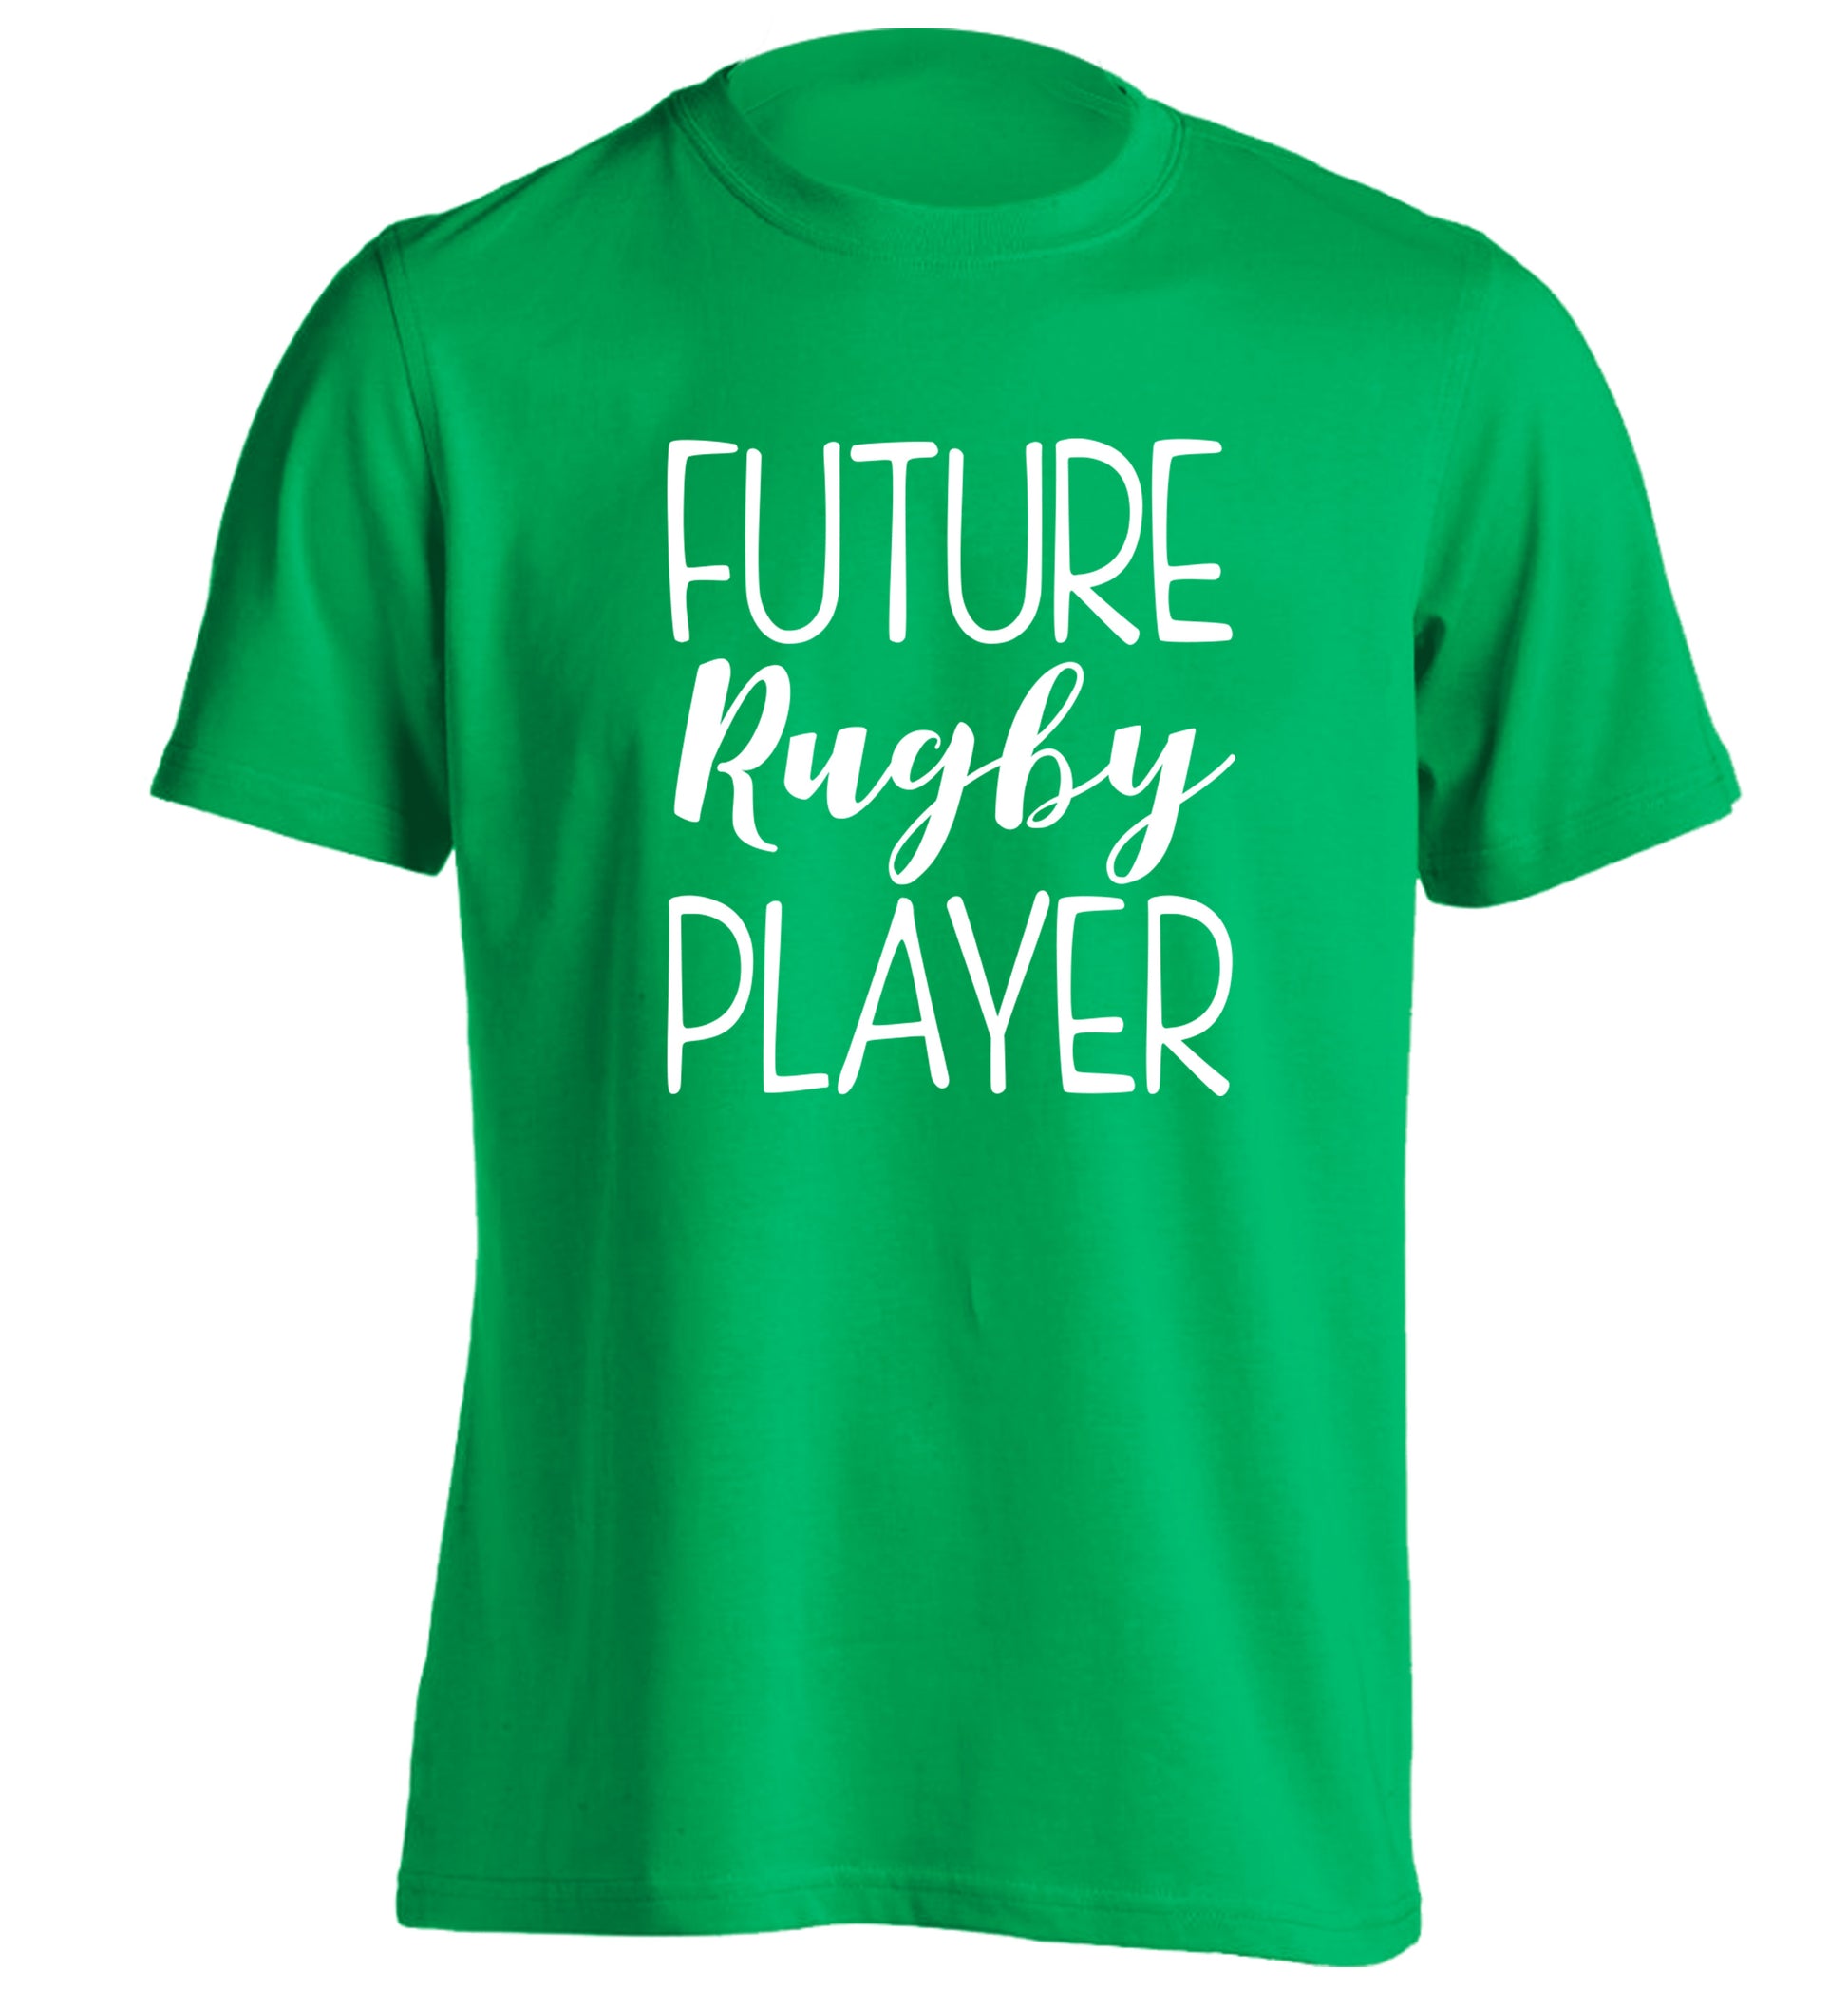 Future rugby player adults unisex green Tshirt 2XL